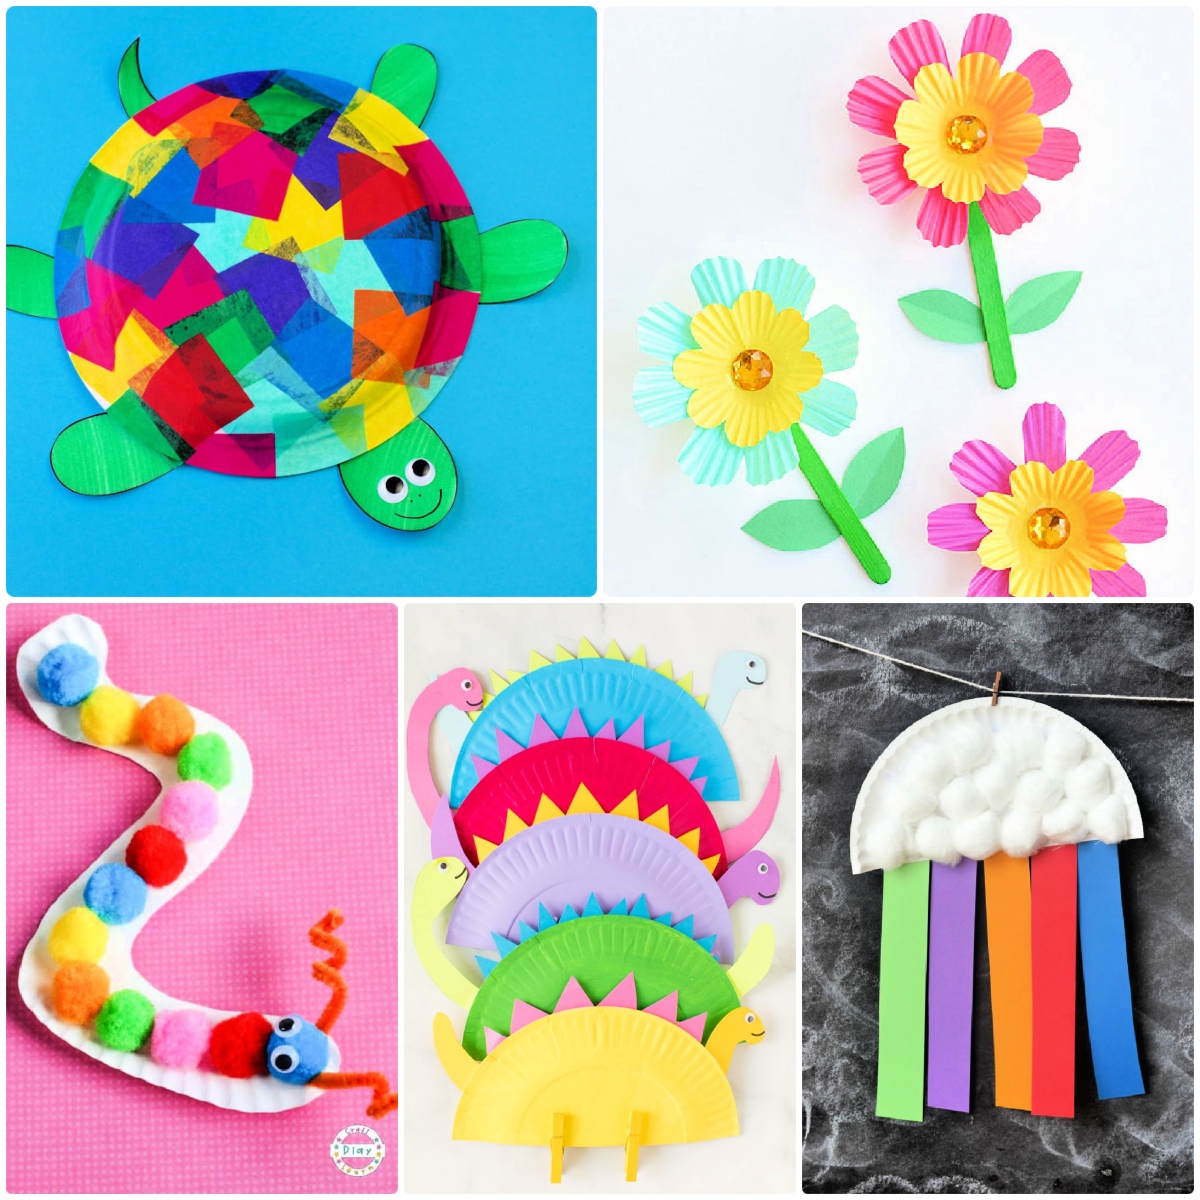 25 Easy Crafts For Toddlers Craft Ideas For 2 4 Year Olds 